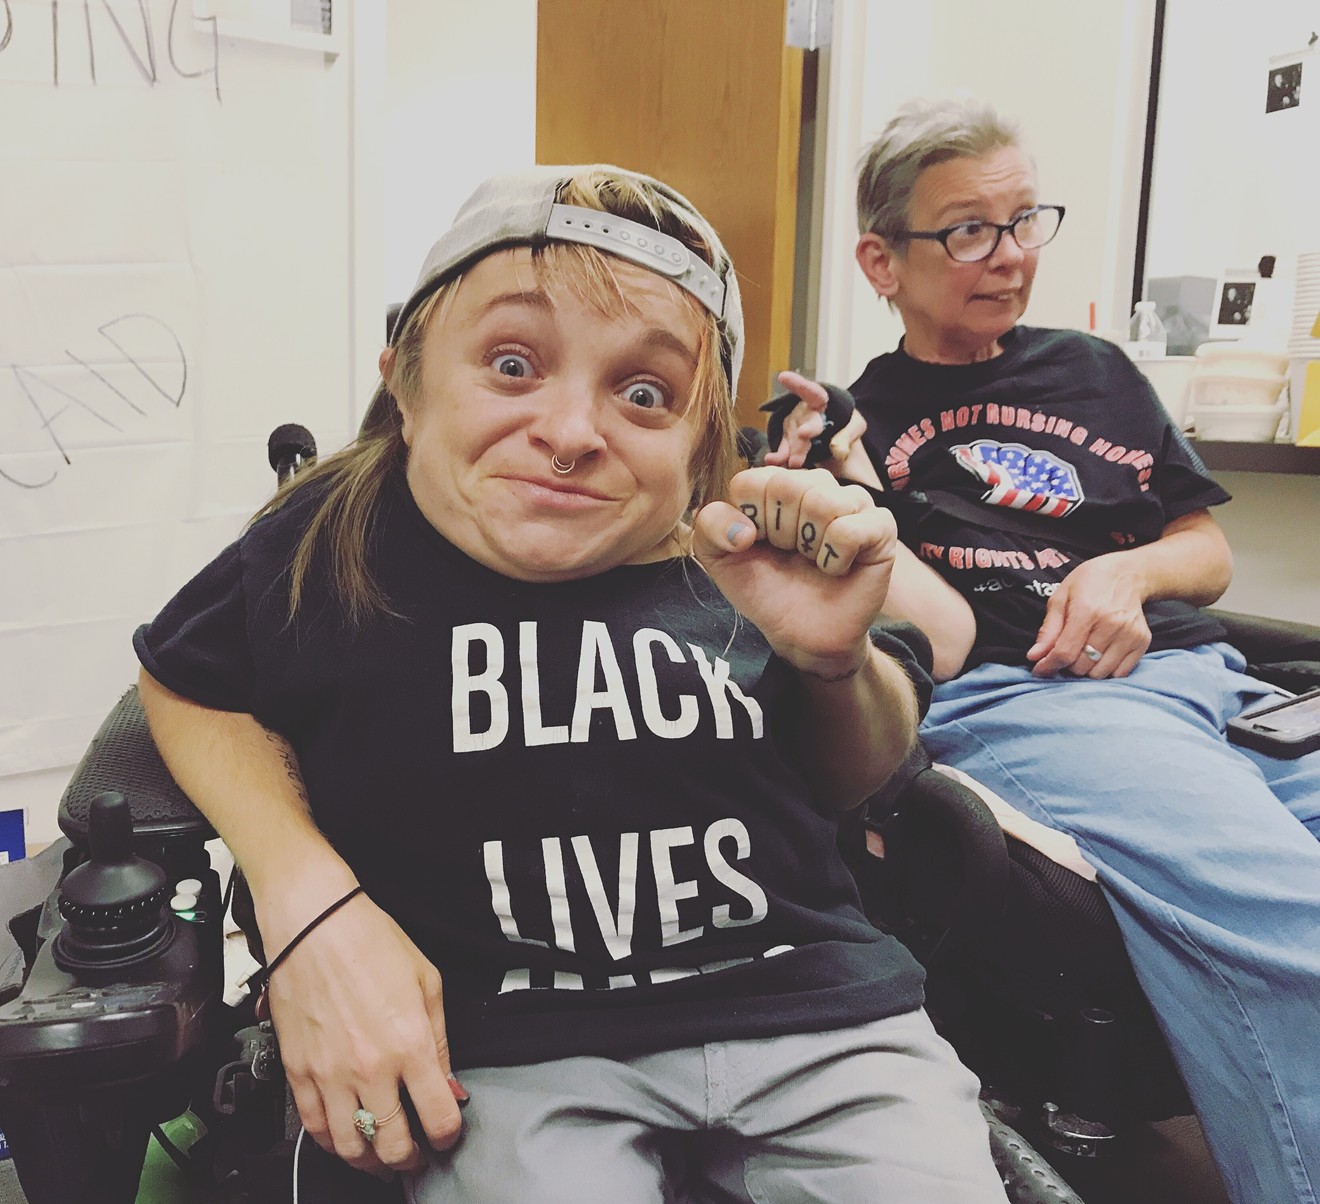 Kalyn Heffernan of Wheelchair Sports Camp is heading into the second day of a sit-in with the disability rights group ADAPT, at Republican Senator Cory Gardner's office.